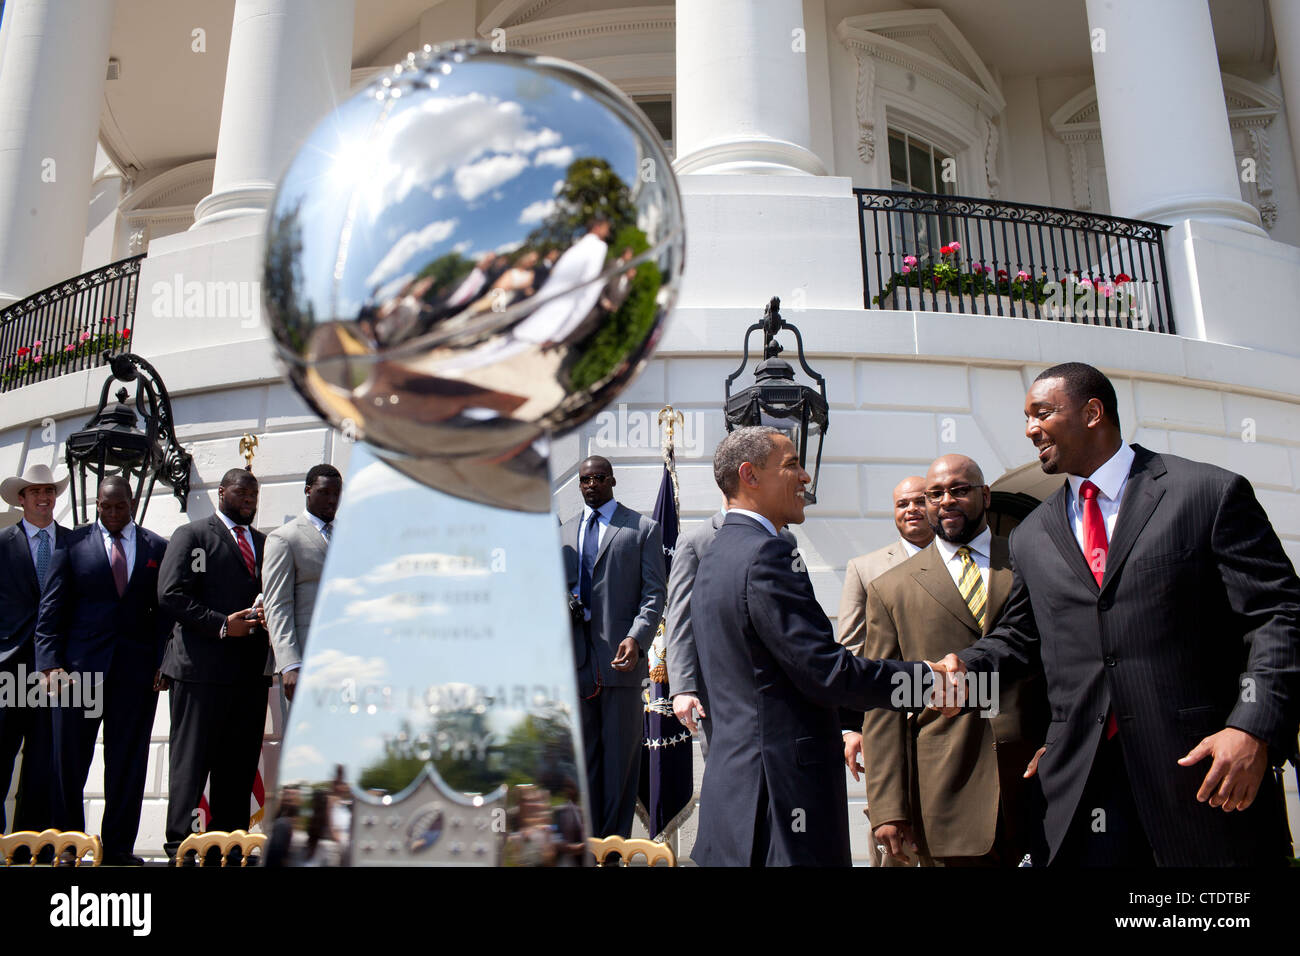 US President Barack Obama greets members of the Super Bowl Champion New York Giants on the South Lawn of the White House during a ceremony honoring the team for their Super Bowl XLVI victory June 8, 2012 in Washington, DC. Stock Photo